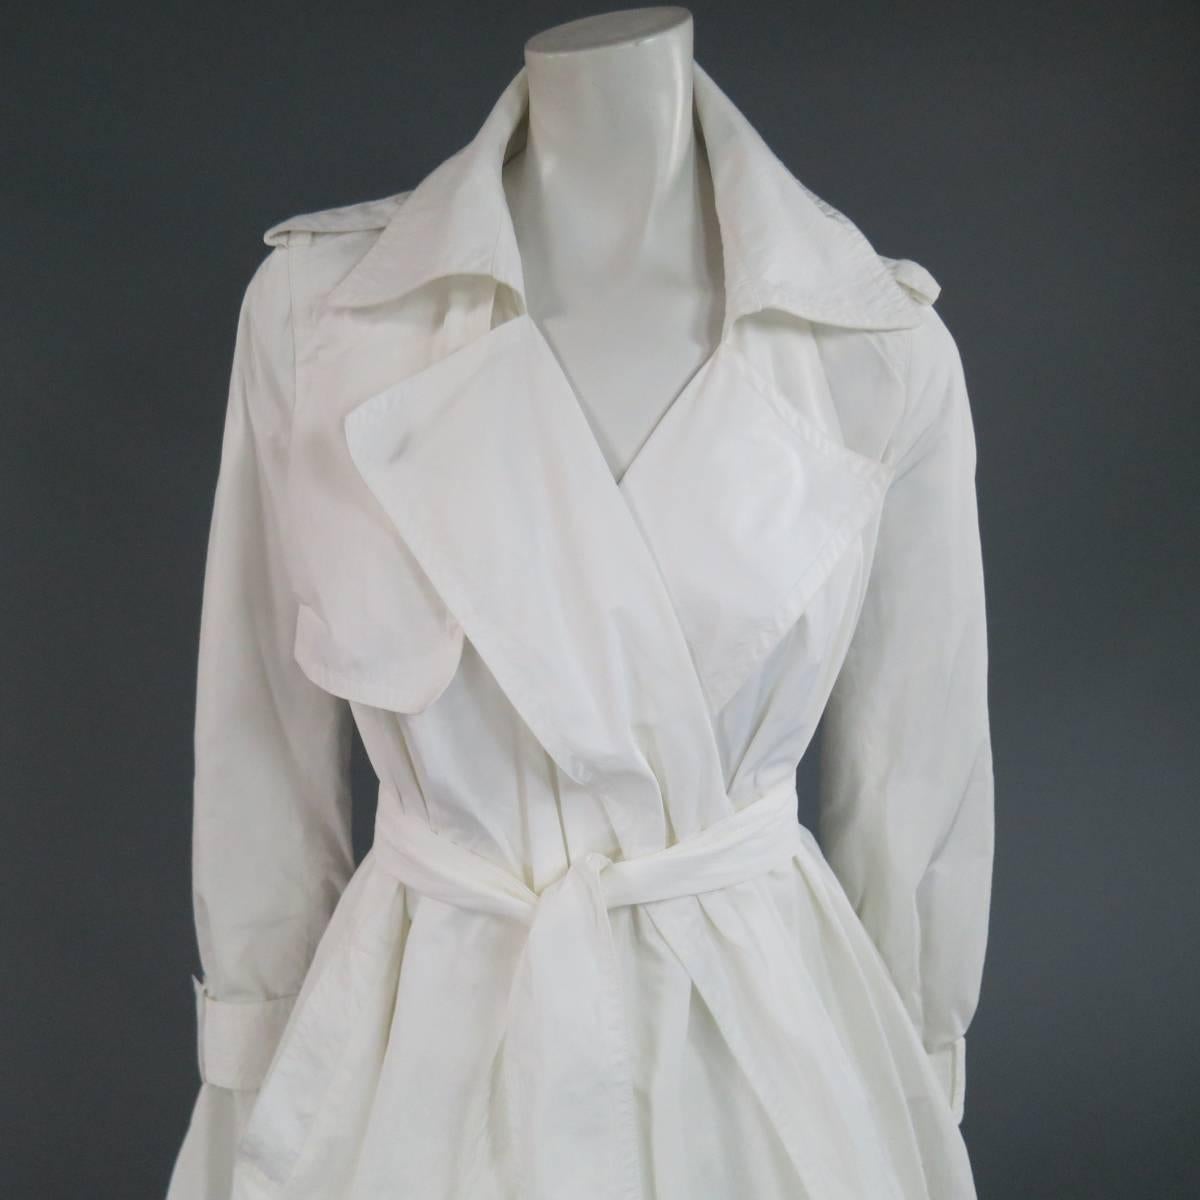 This chic minimalist KAUFMAN FRANCO trench coat comes in a textured off white polyester and features a pointed lapel, epaulets, storm flap, belted cuffs, A line wrap skirt, and thick belt with tan leather ends.
 
Good Pre-Owned Condition.
Marked: